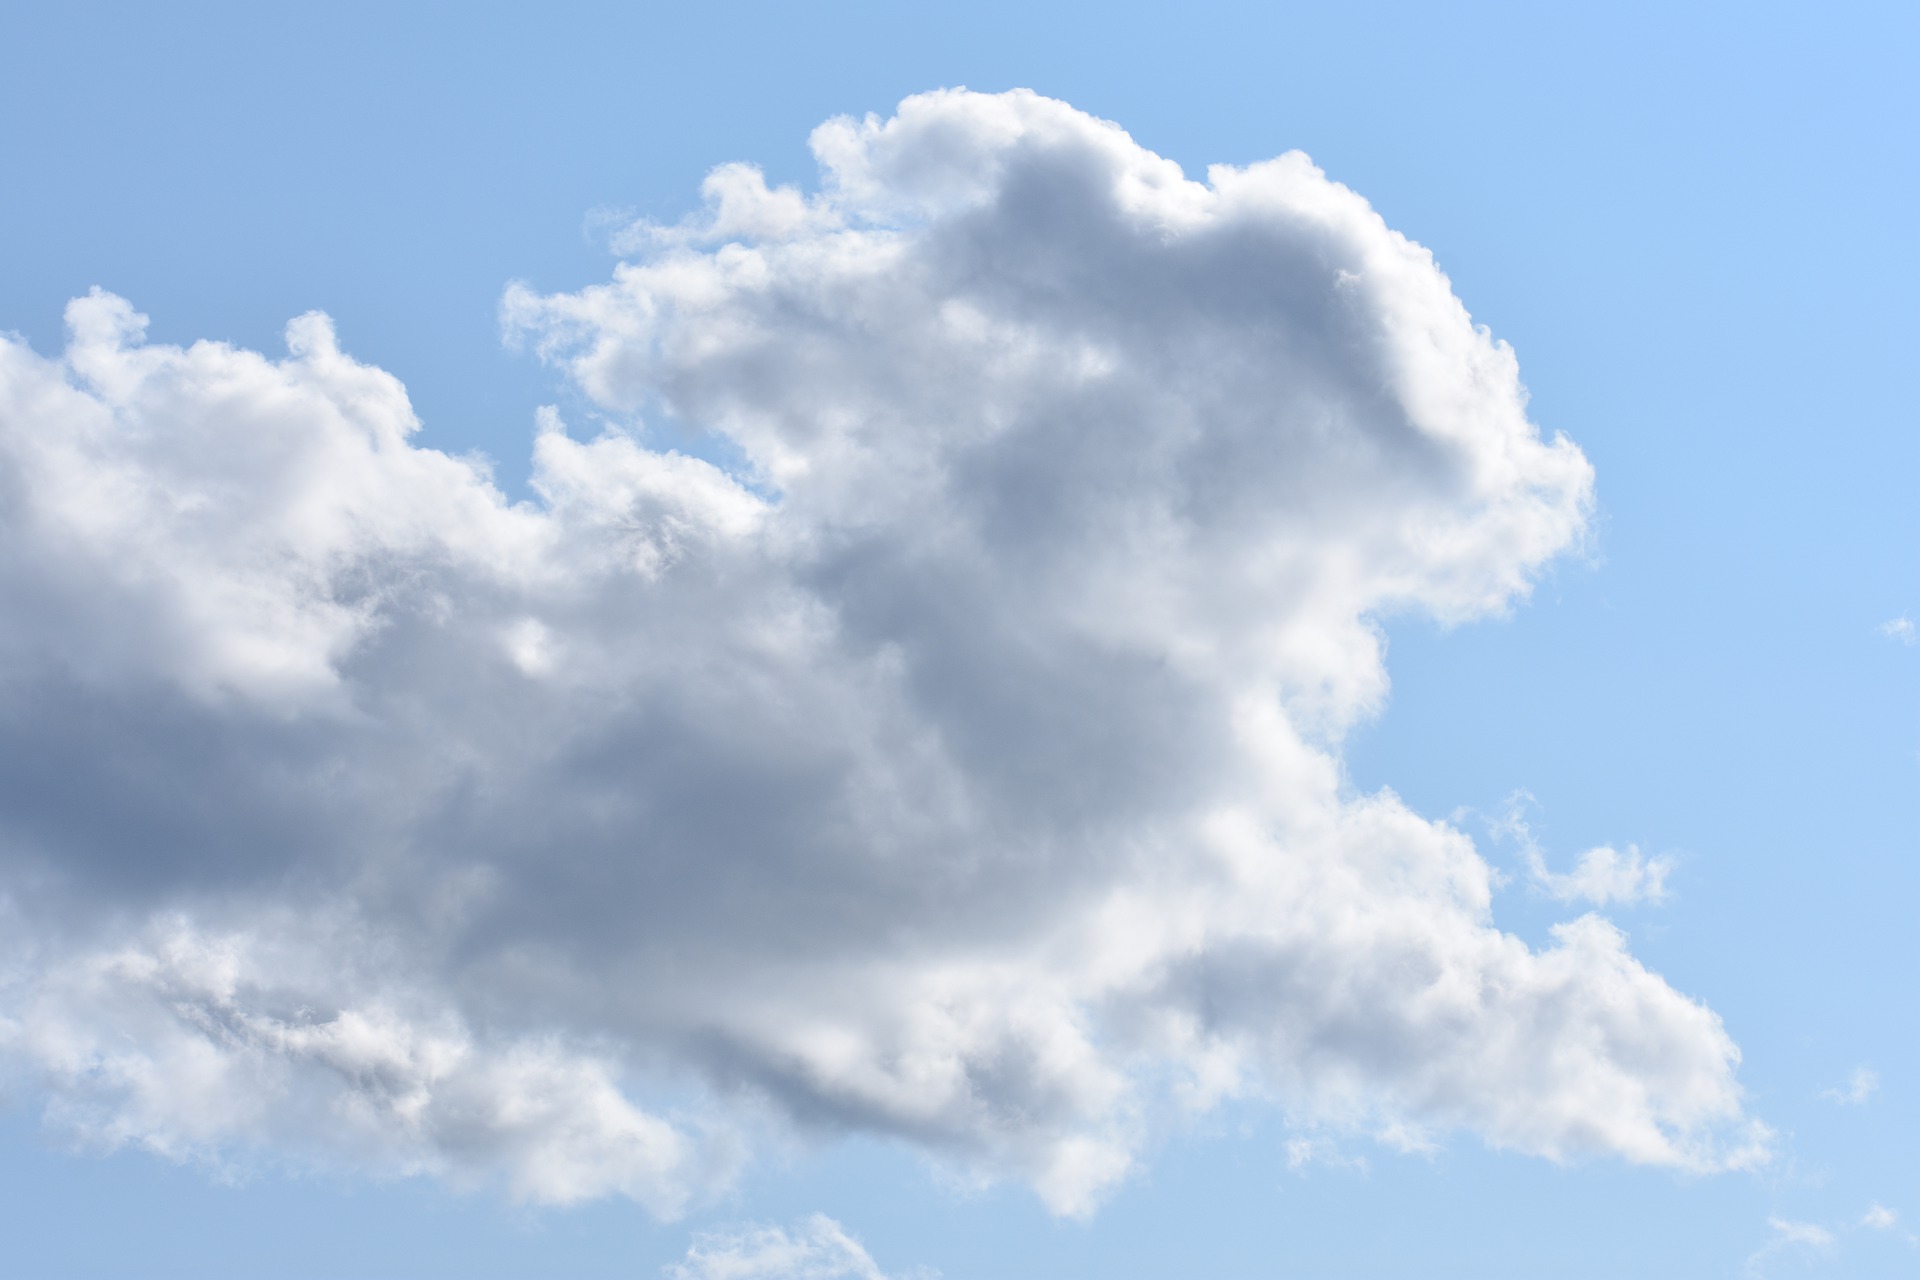 A cloud is in the formation of a rabbit.